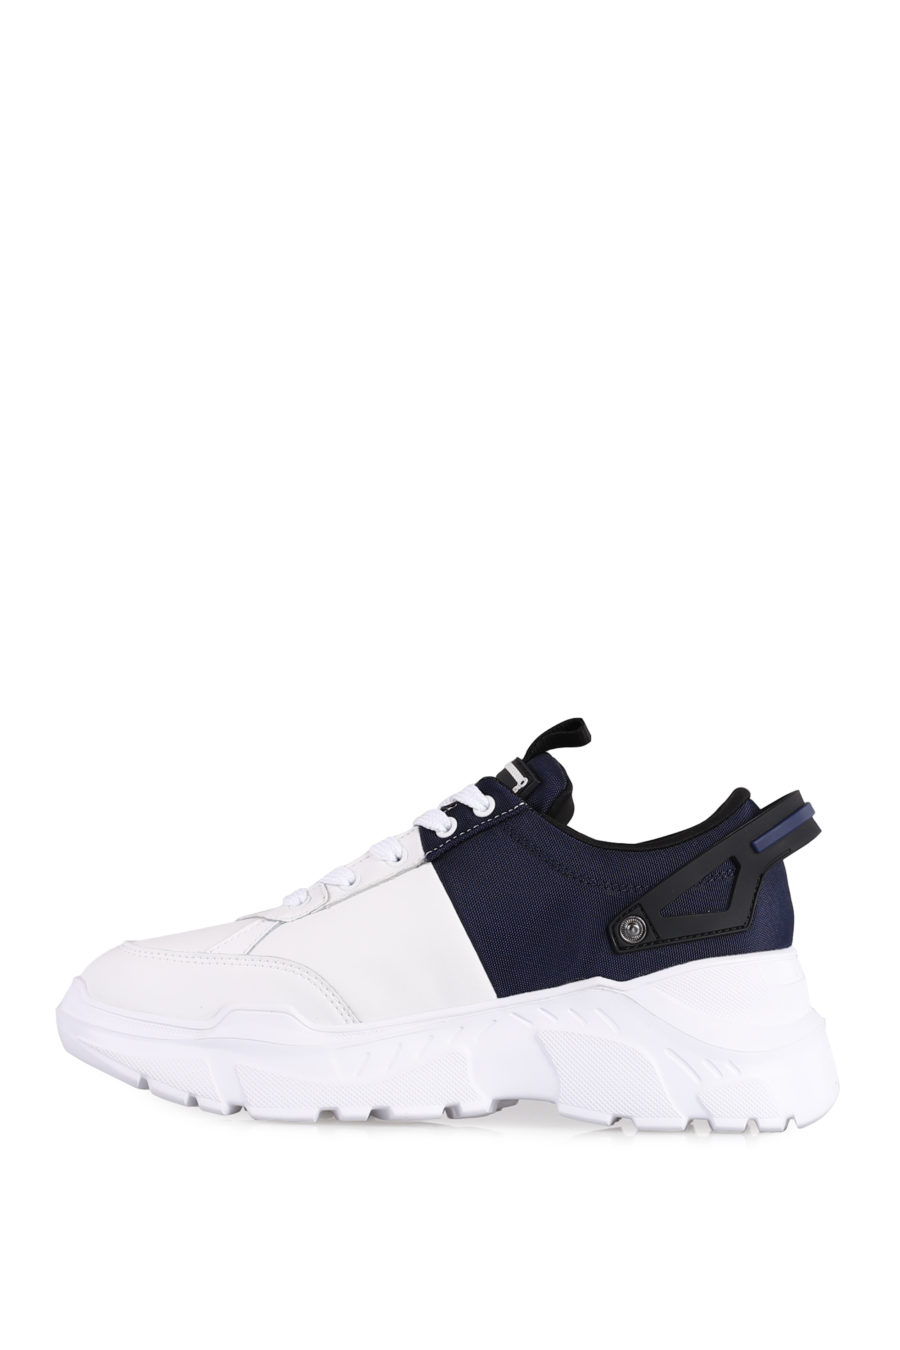 Shoes "Speedtrack" in white and blue - IMG 1046